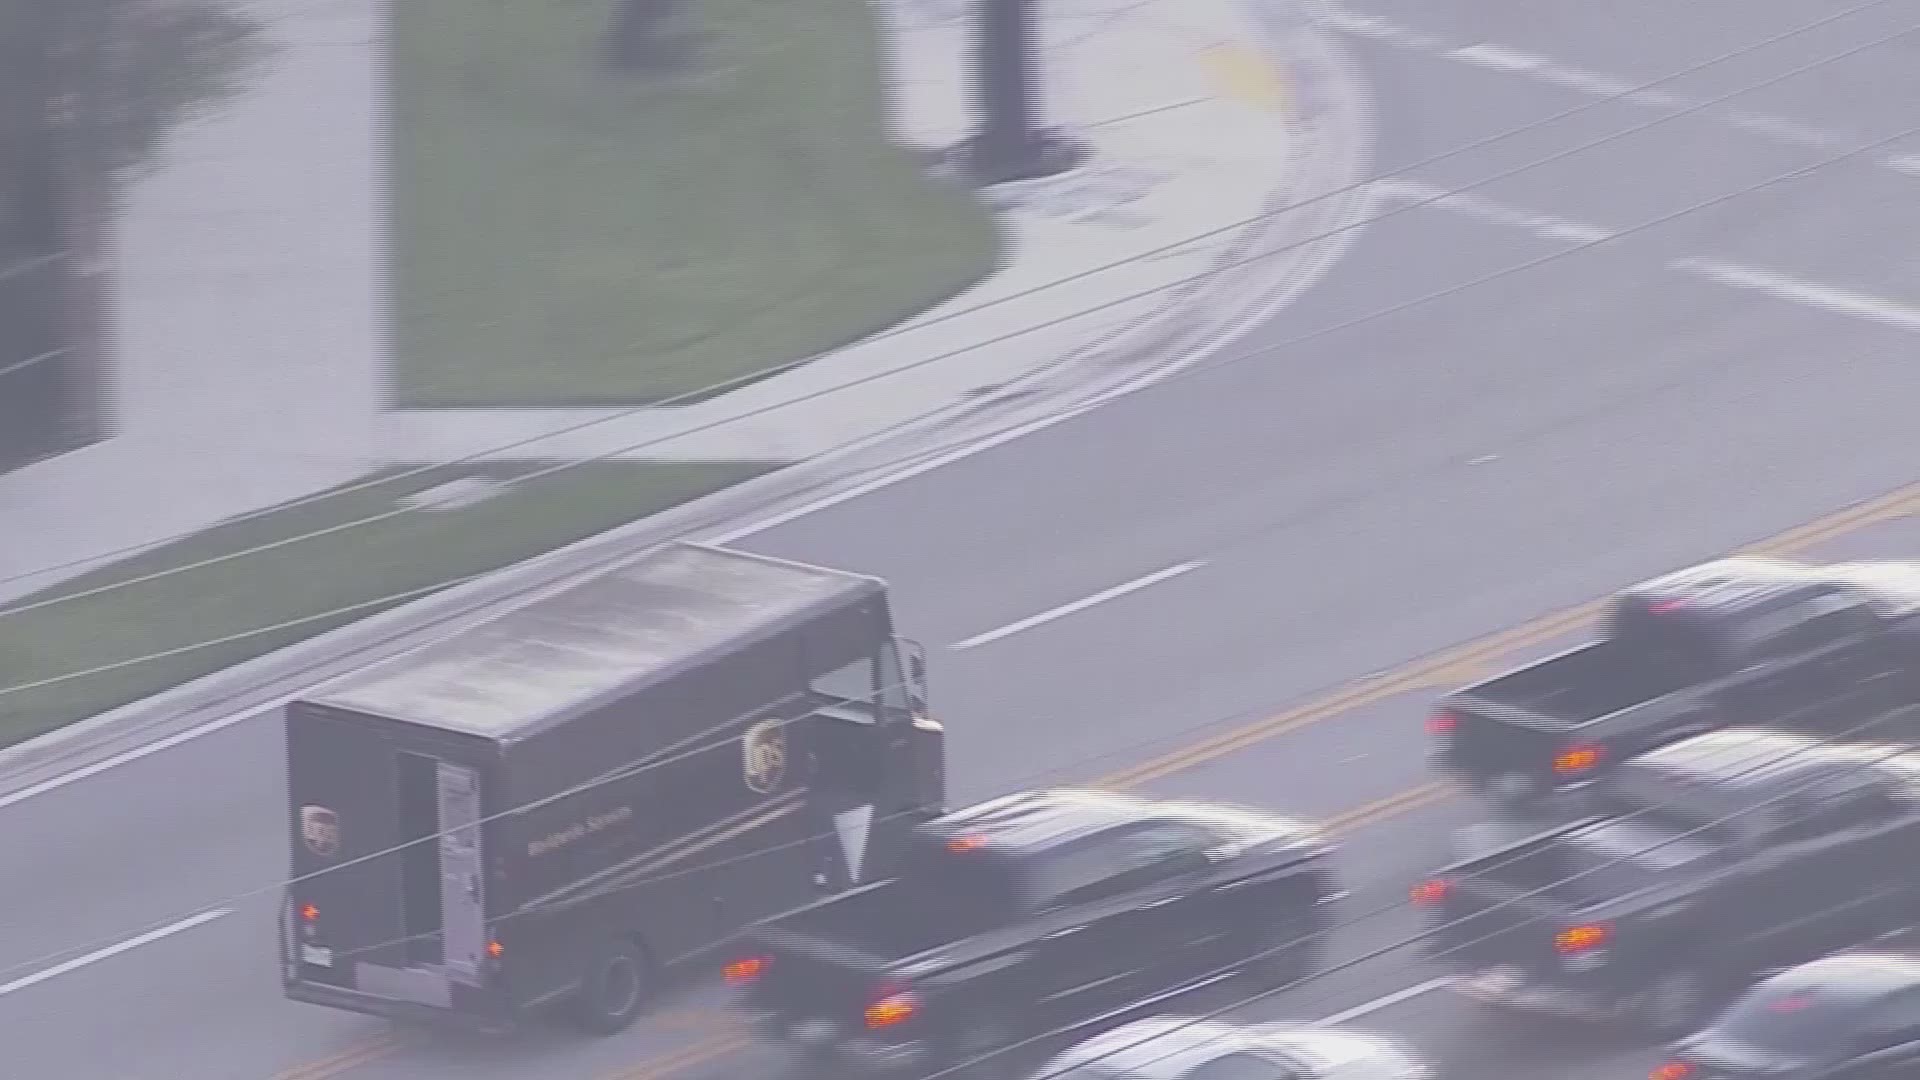 Several police agencies were involved in the pursuit of a carjacked UPS truck through the streets of South Florida on Thursday afternoon.